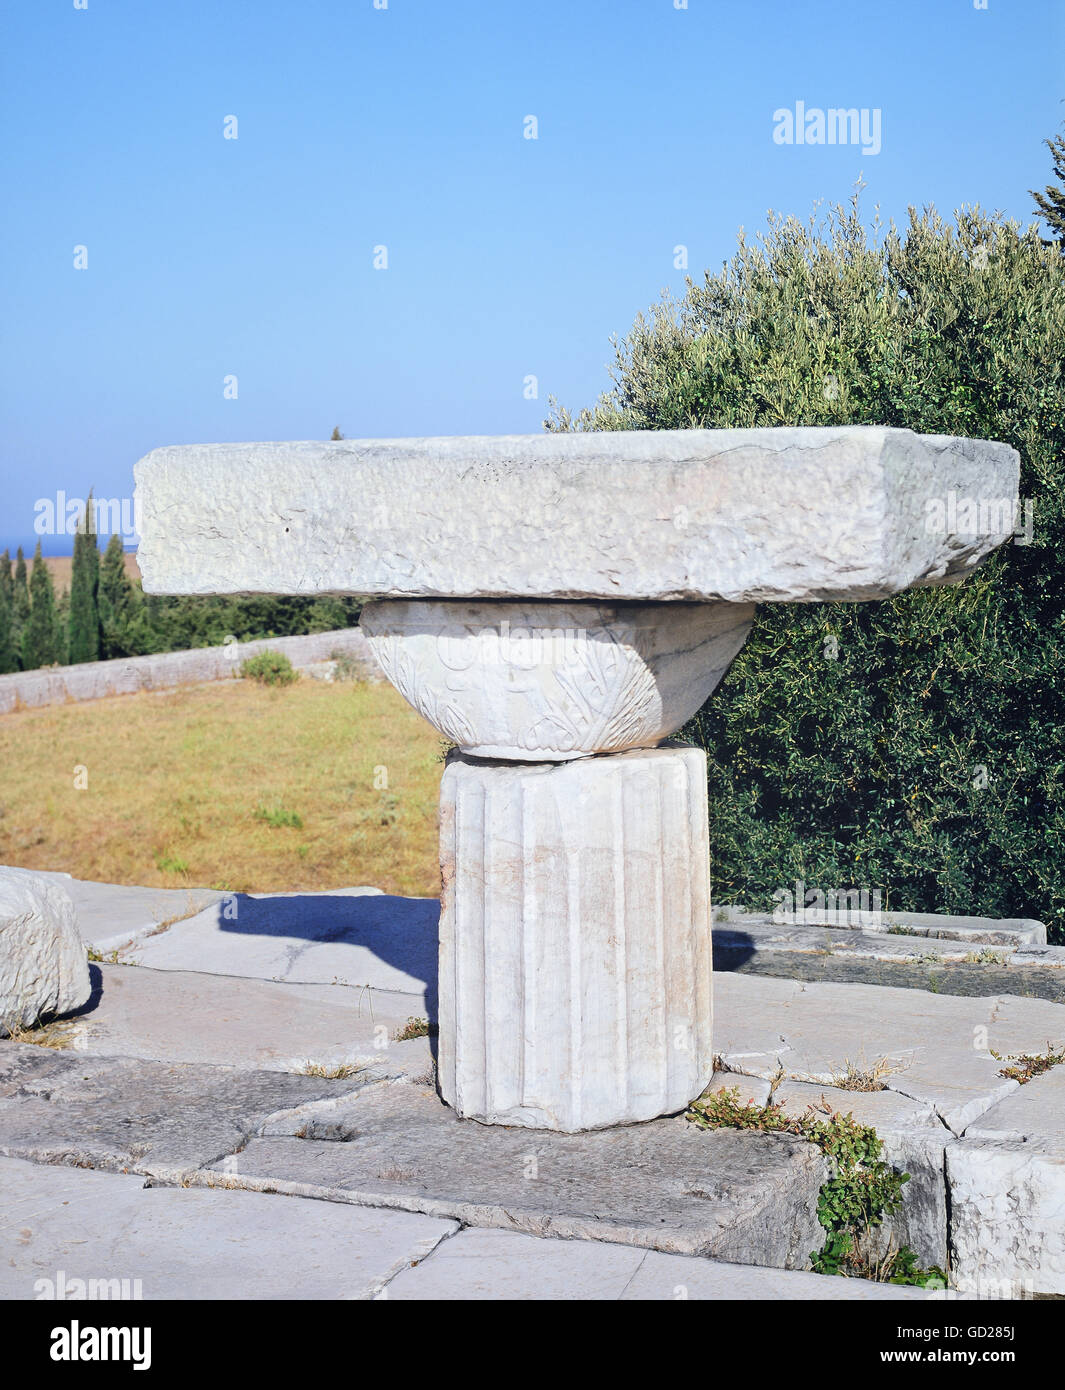 religion, Christianity, altars, early Christian altar on the upper terrace of the Asclepius sanctuary, Cos, Greece, trimmed marble mensa, composite with ancient channeled pillar stump with a Byzantine capital of the 2nd and 3rd century AD, Additional-Rights-Clearences-Not Available Stock Photo